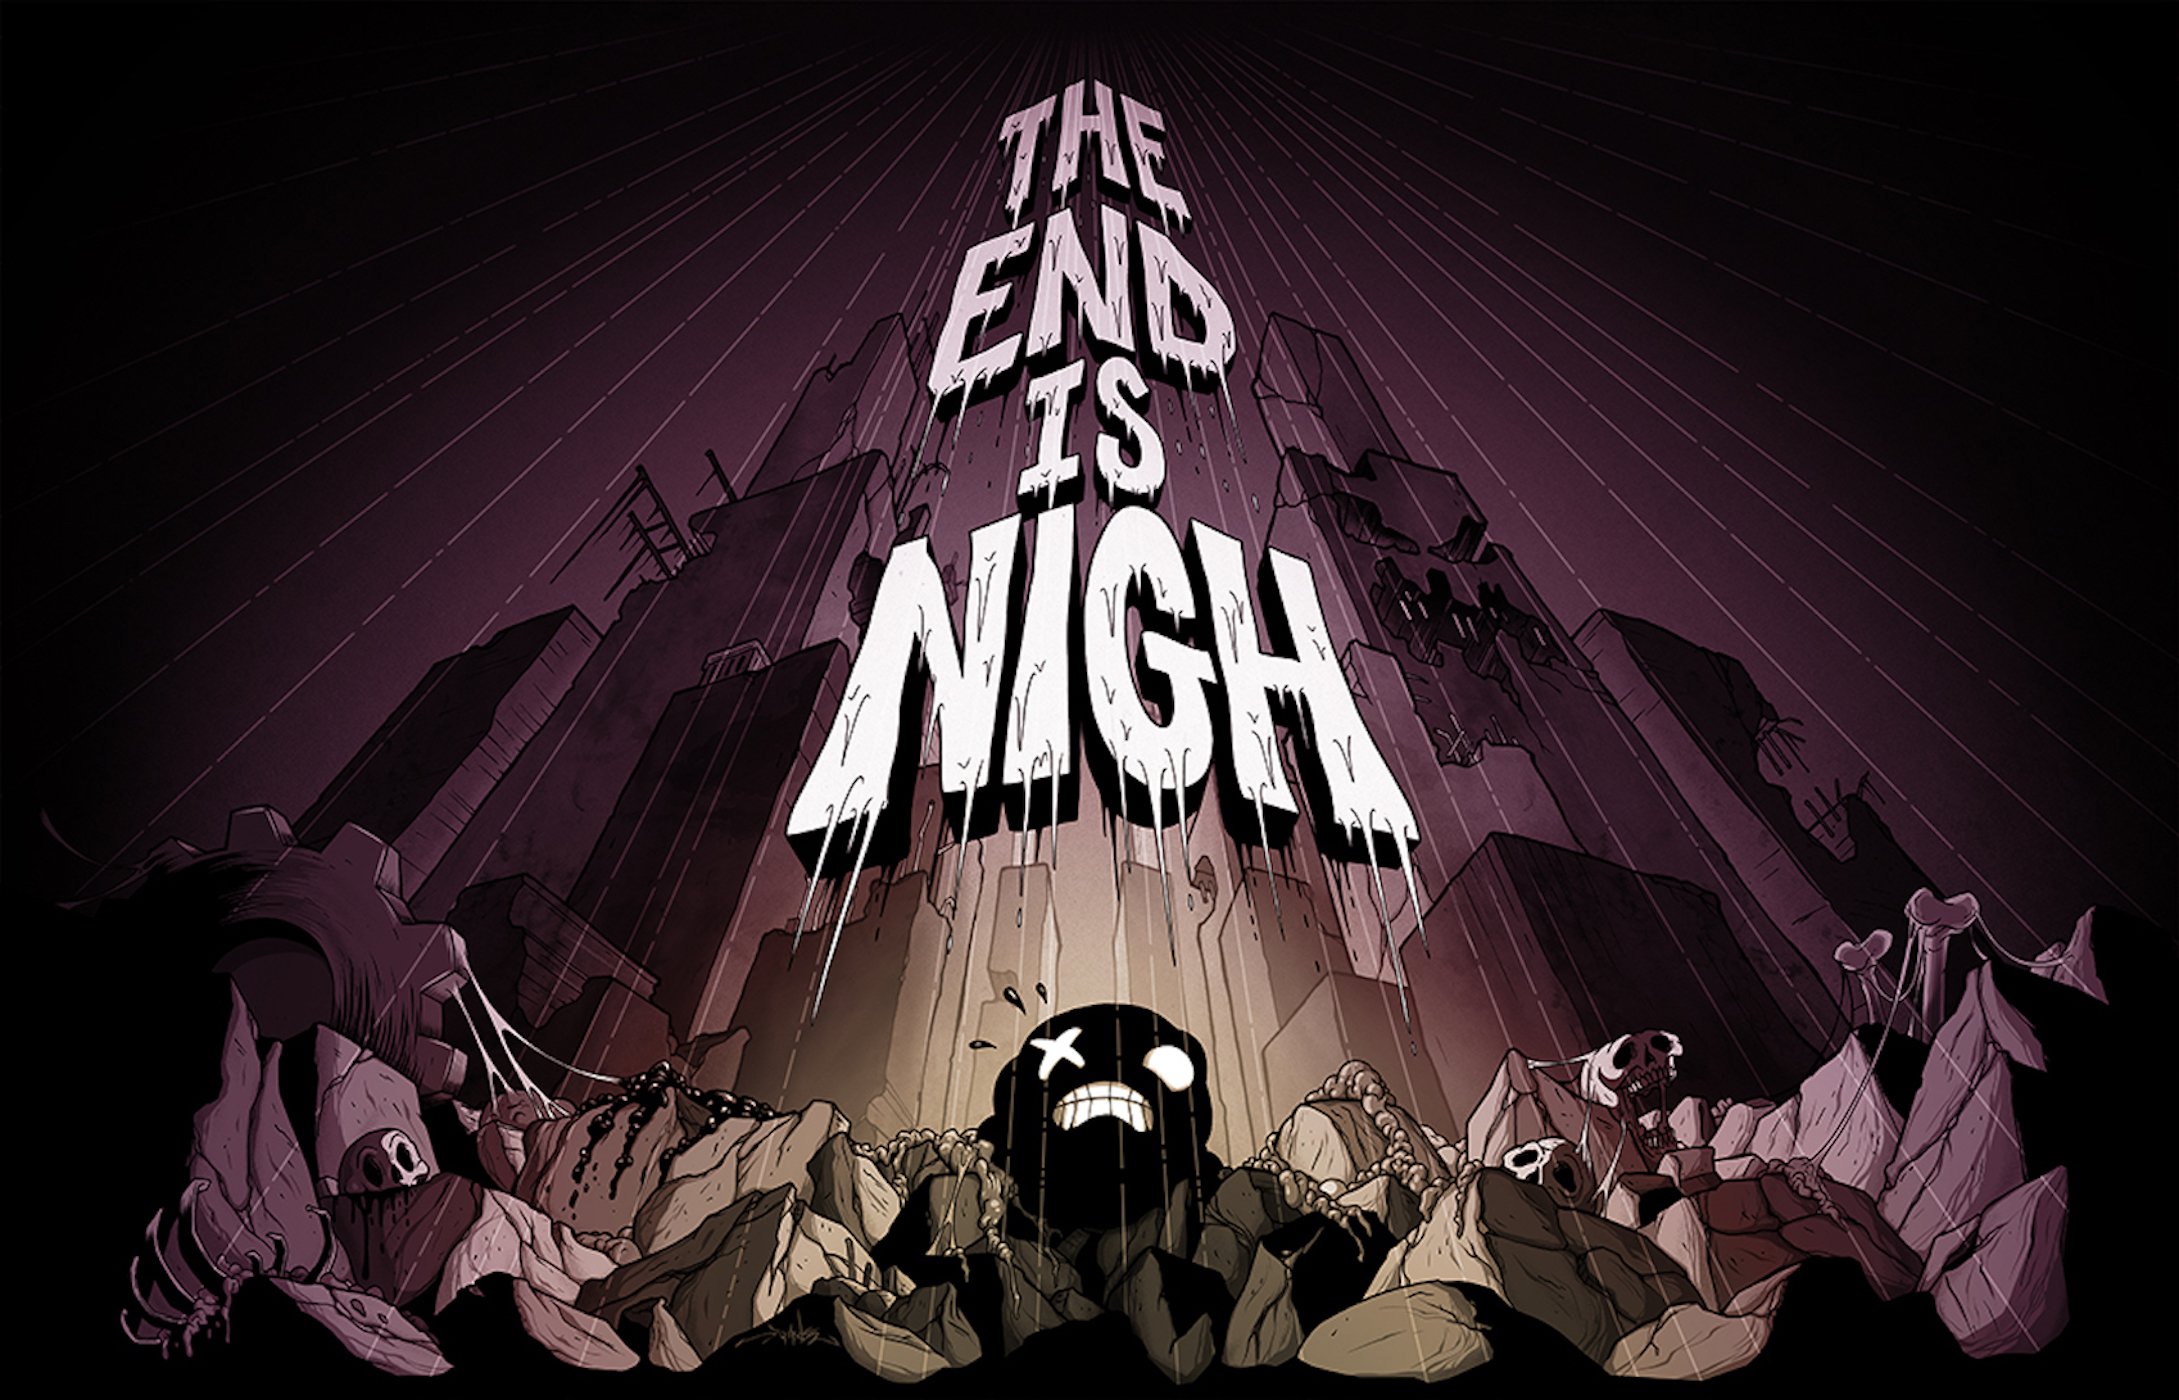 The end is beautiful. The end is nigh. The end is nigh игра. In the end игра. The end is High.